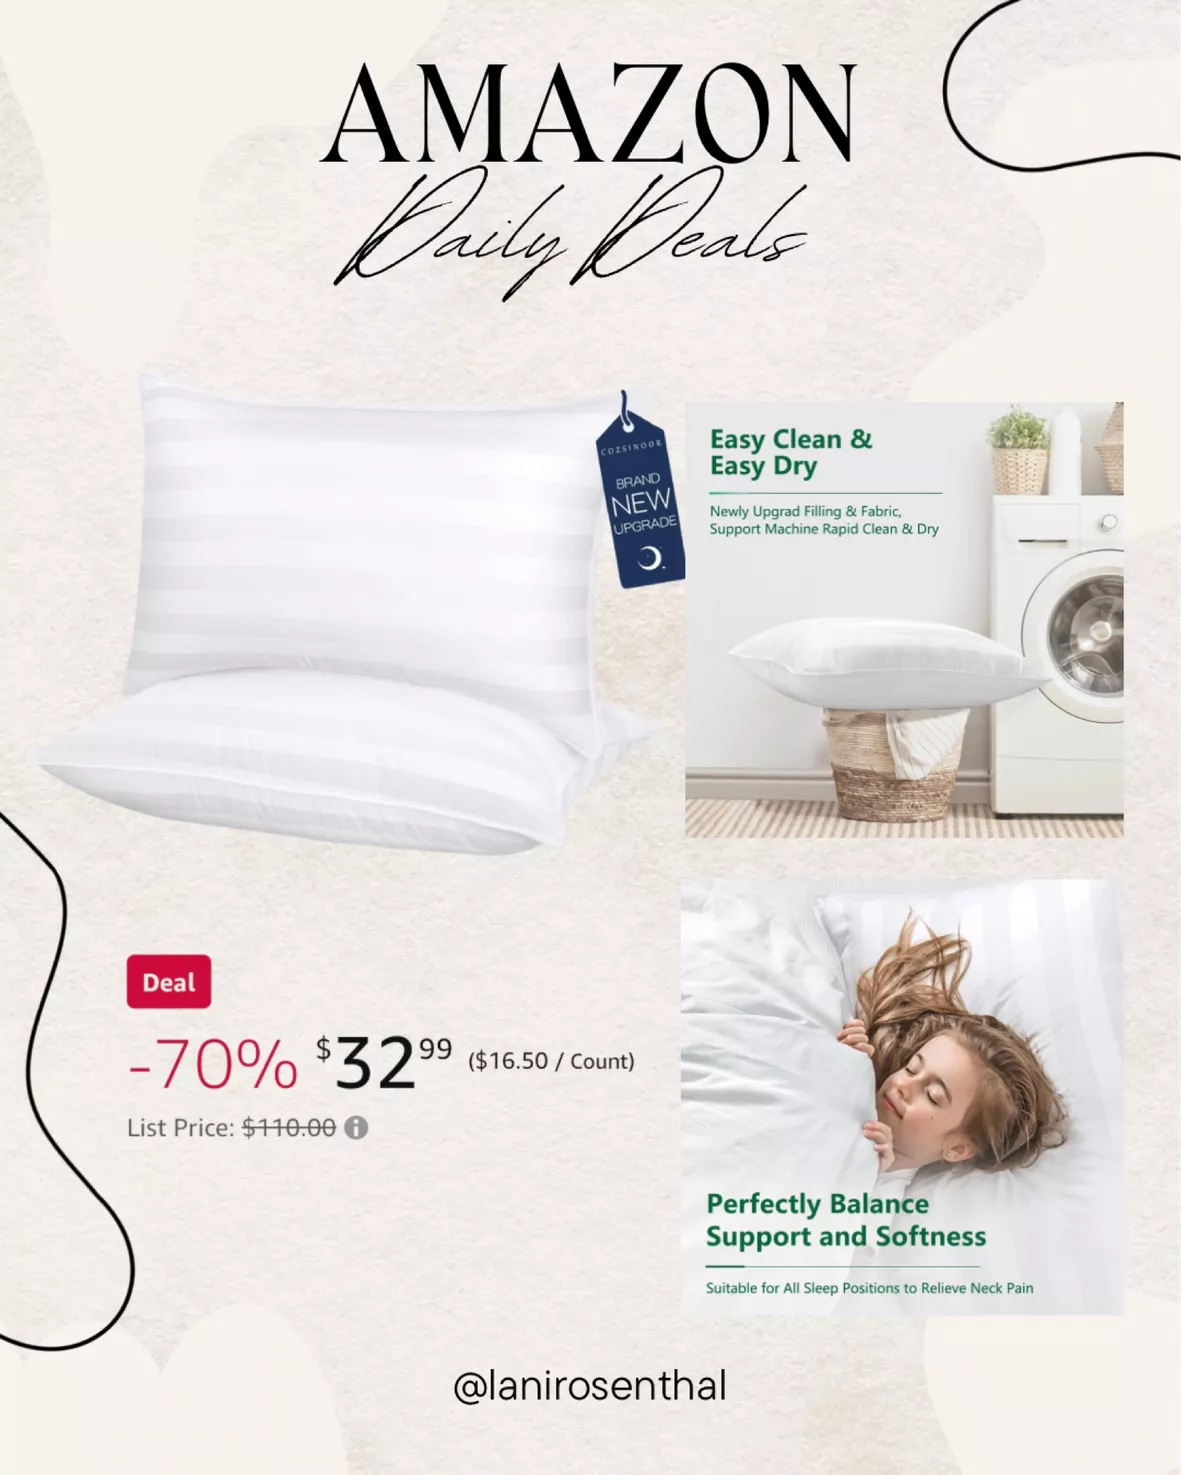 Cozsinoor's Bed Pillows Are on Sale and Have a Coupon at